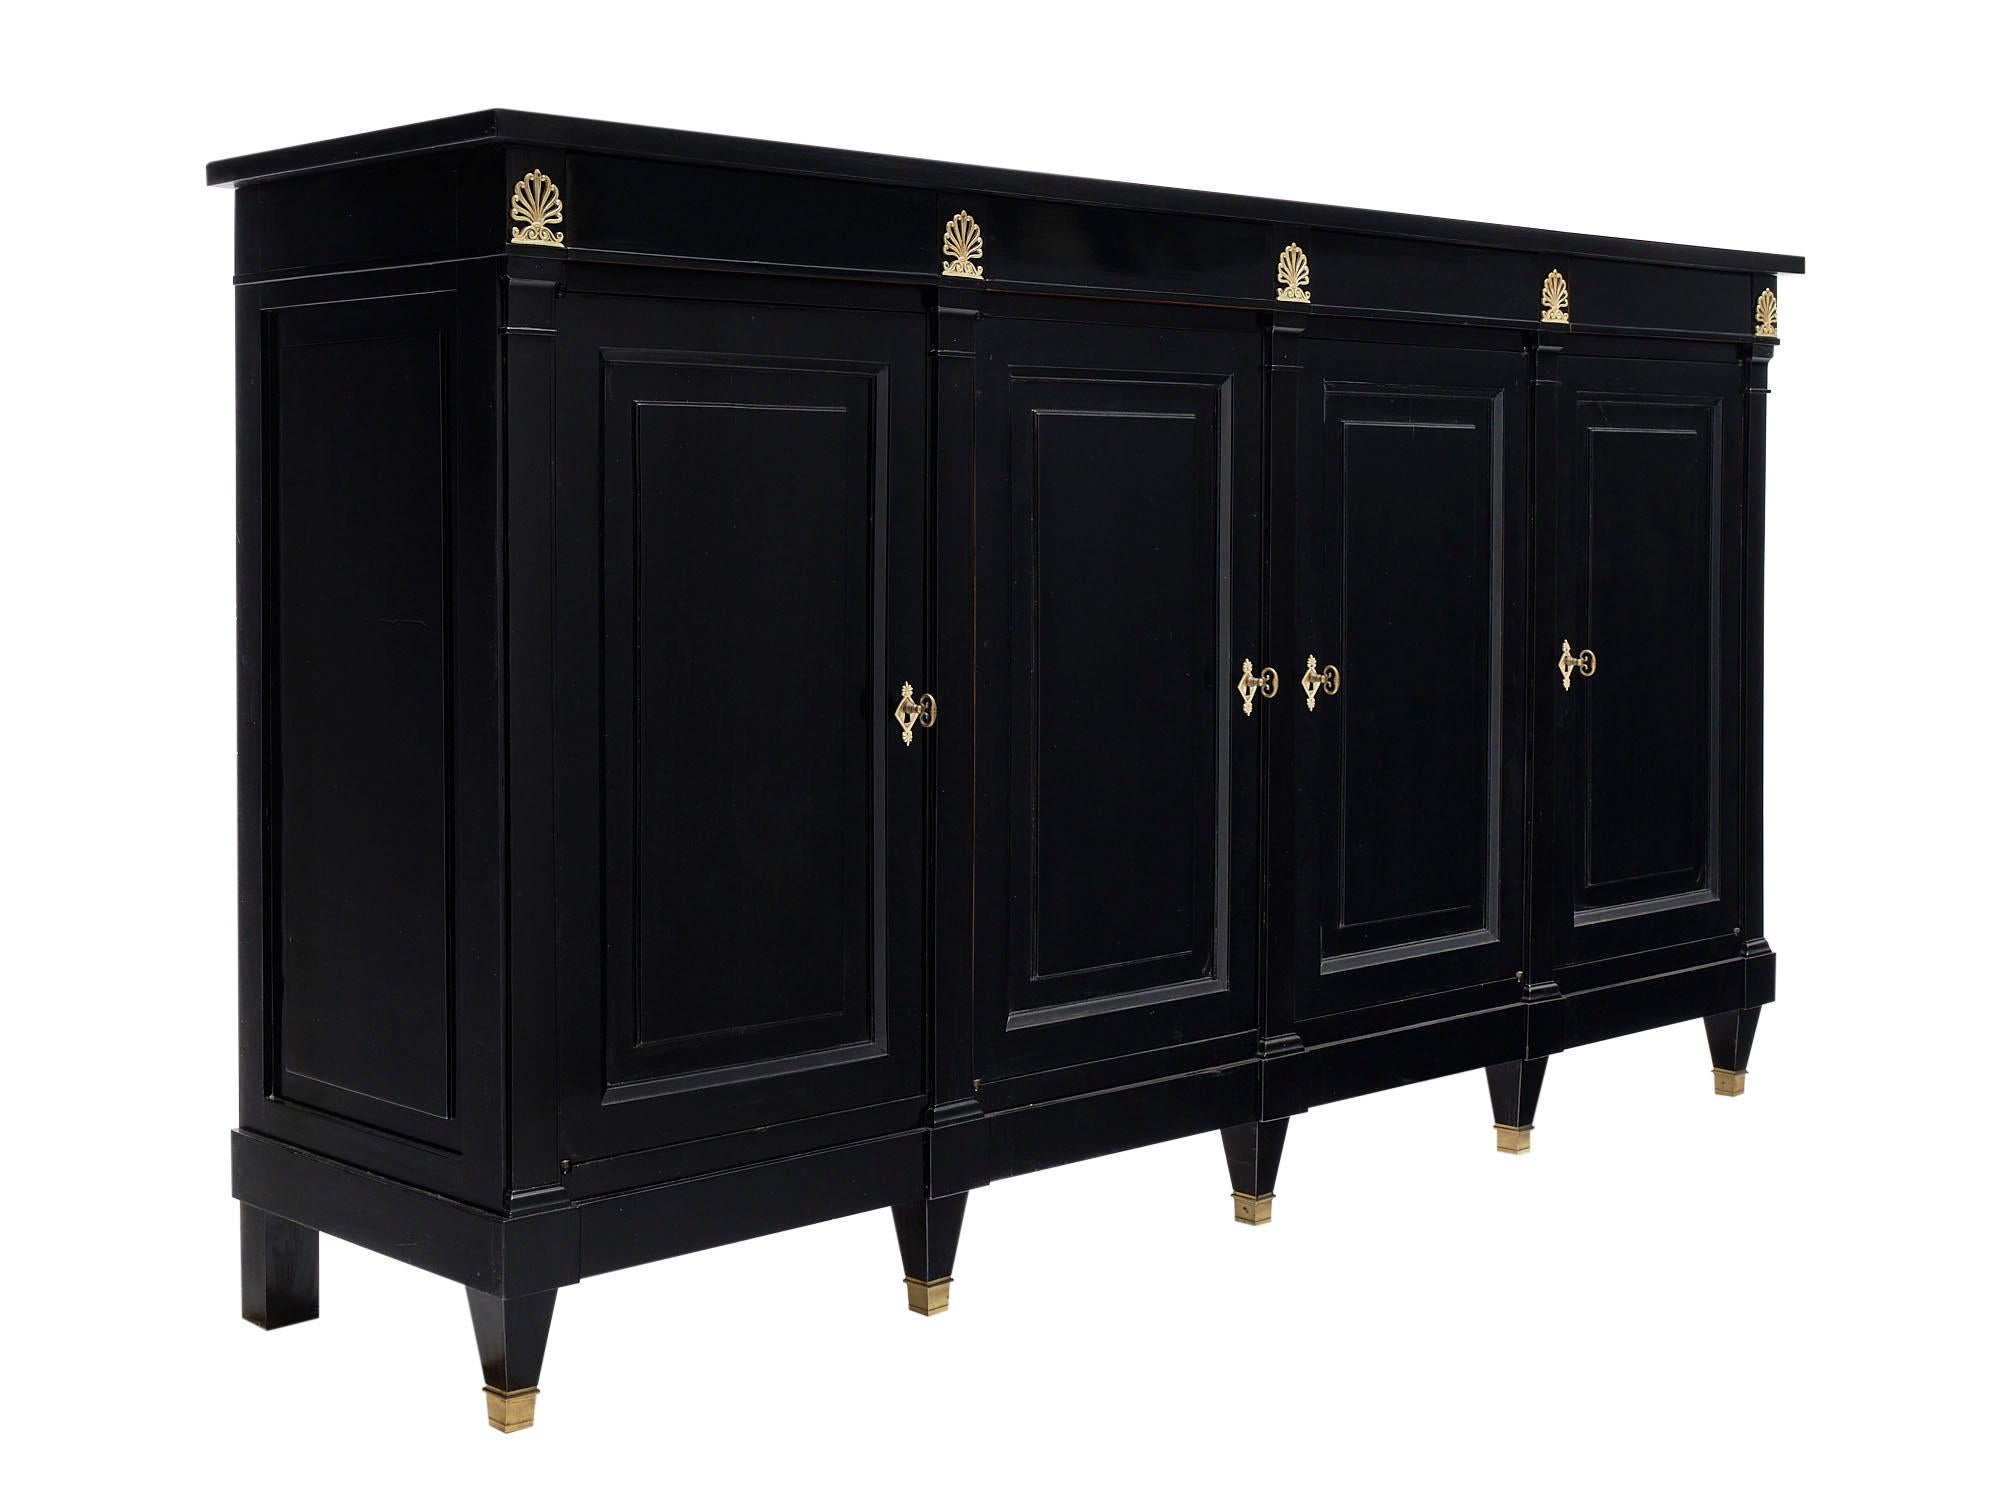 19th century French antique buffet made of solid cherrywood that has been ebonized and finished with a lustrous museum-quality French polish. We love the stylized bronze acanthus leaf decor and original hardware. There are four dovetailed drawers